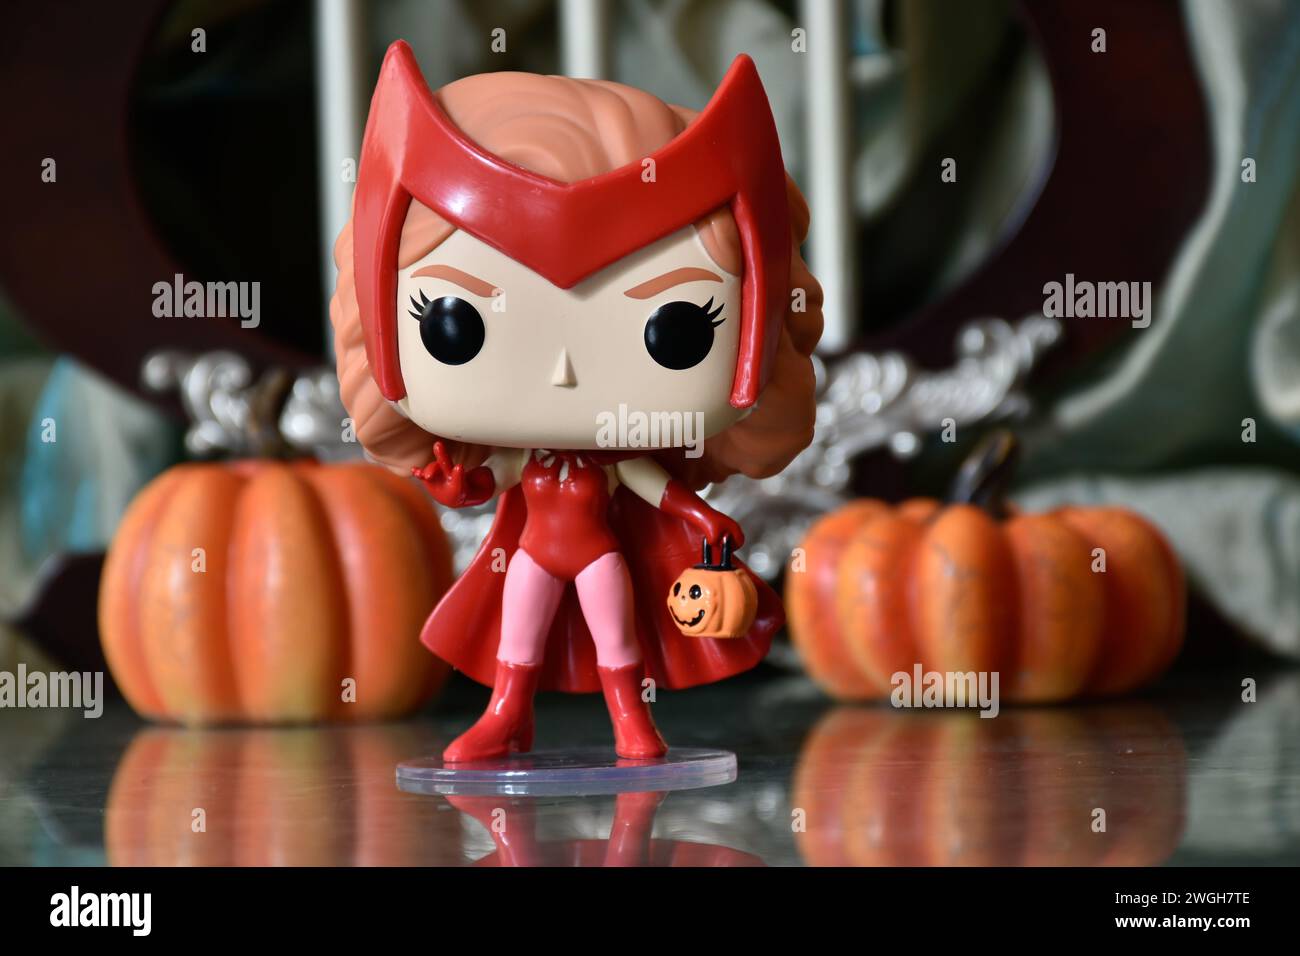 Funko Pop action figure of Marvel Avengers superhero Scarlet Witch in Halloween costume from tv series WandaVision. Pumpkins, decor, reflection. Stock Photo